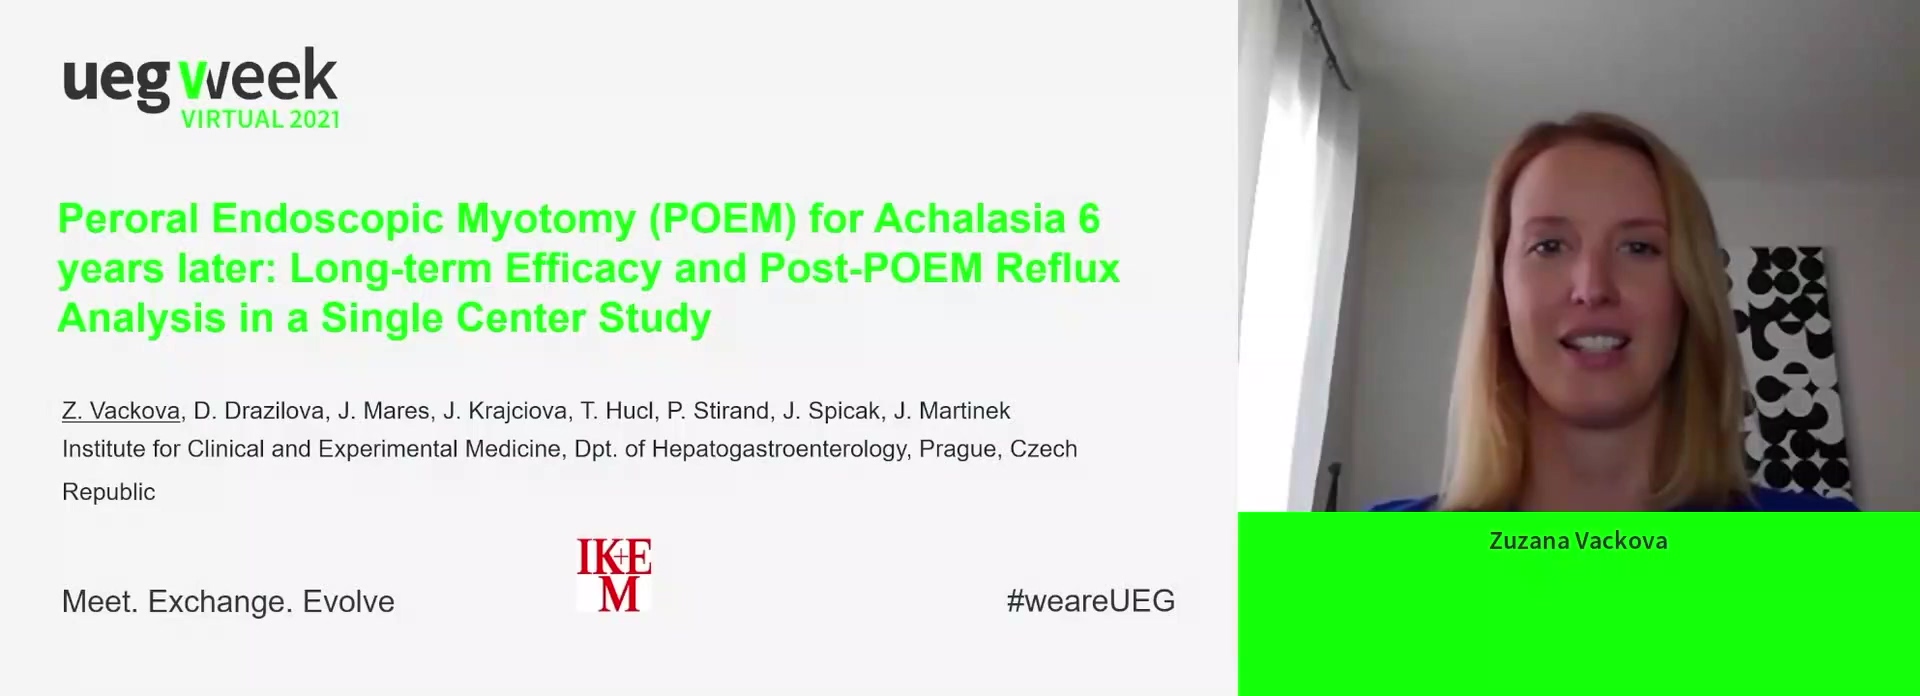 PERORAL ENDOSCOPIC MYOTOMY (POEM) FOR ACHALASIA 6 YEARS LATER: LONG-TERM EFFICACY AND POST-POEM REFLUX ANALYSIS IN A SINGLE CENTER STUDY